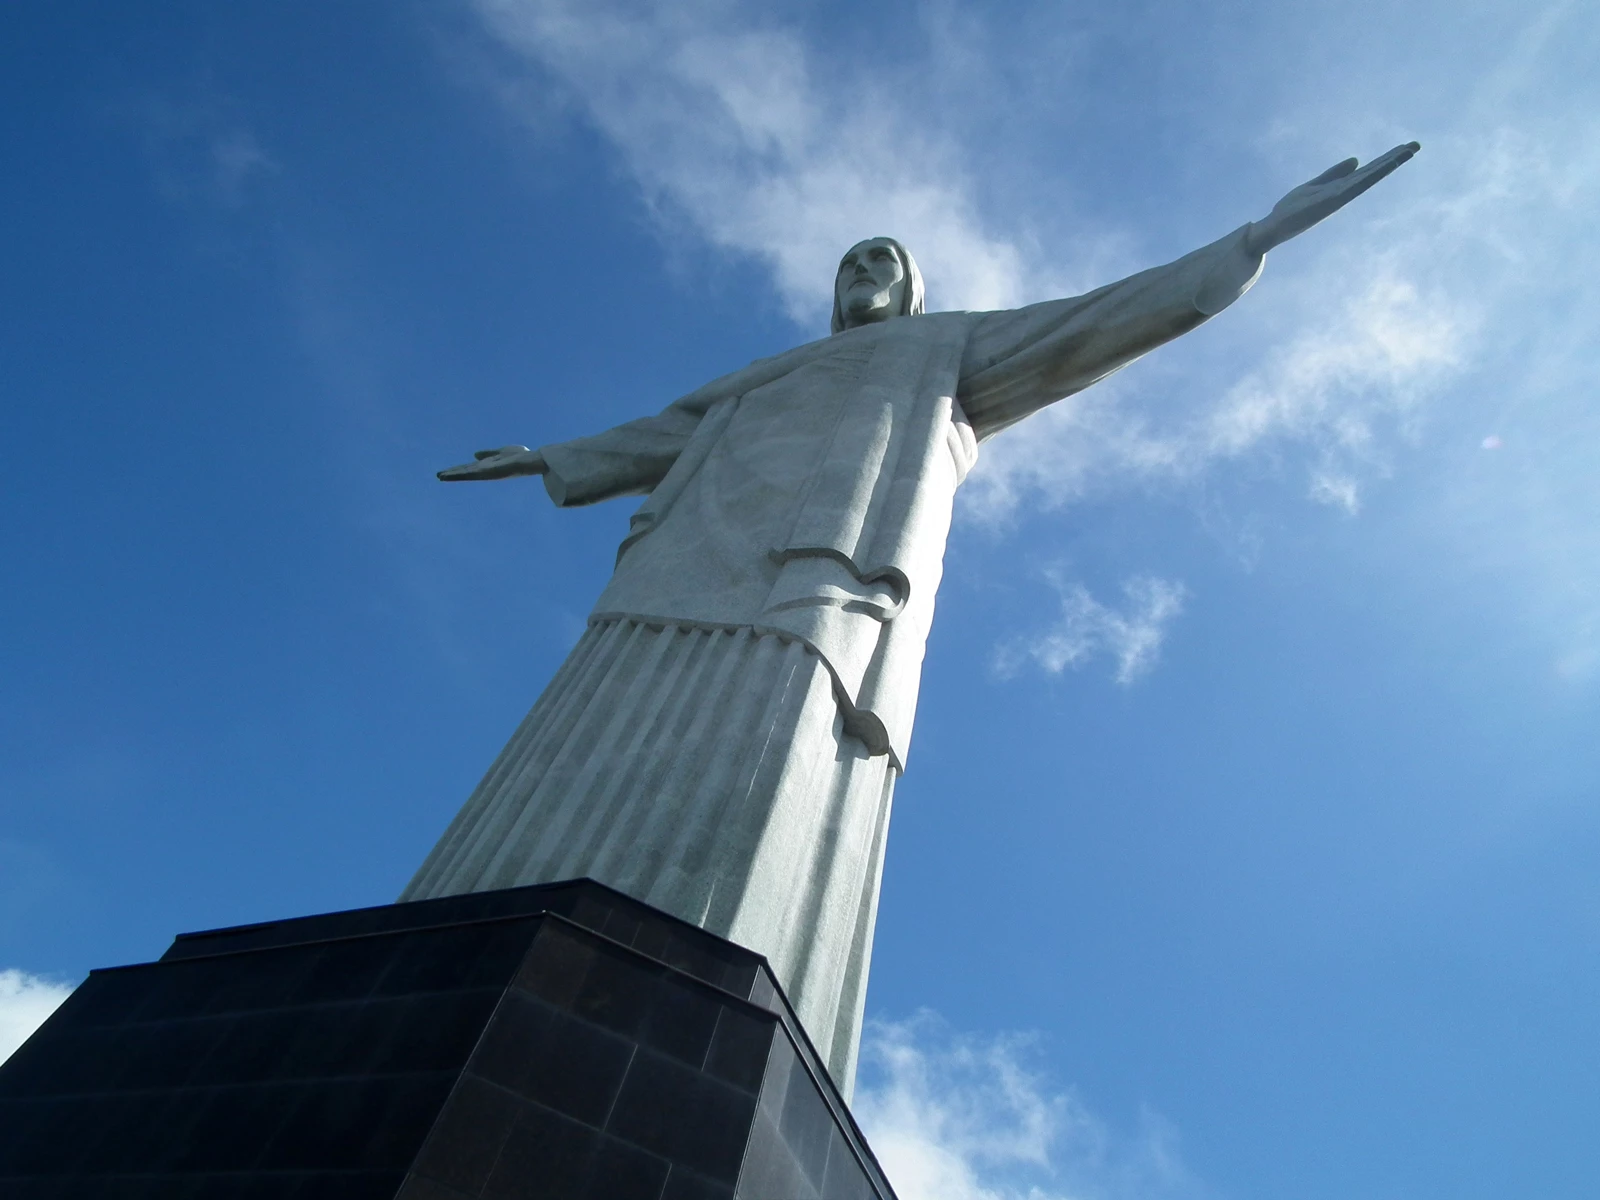 The huge statue of Christ the Redeemer on top of a mountain in Rio, Brazil